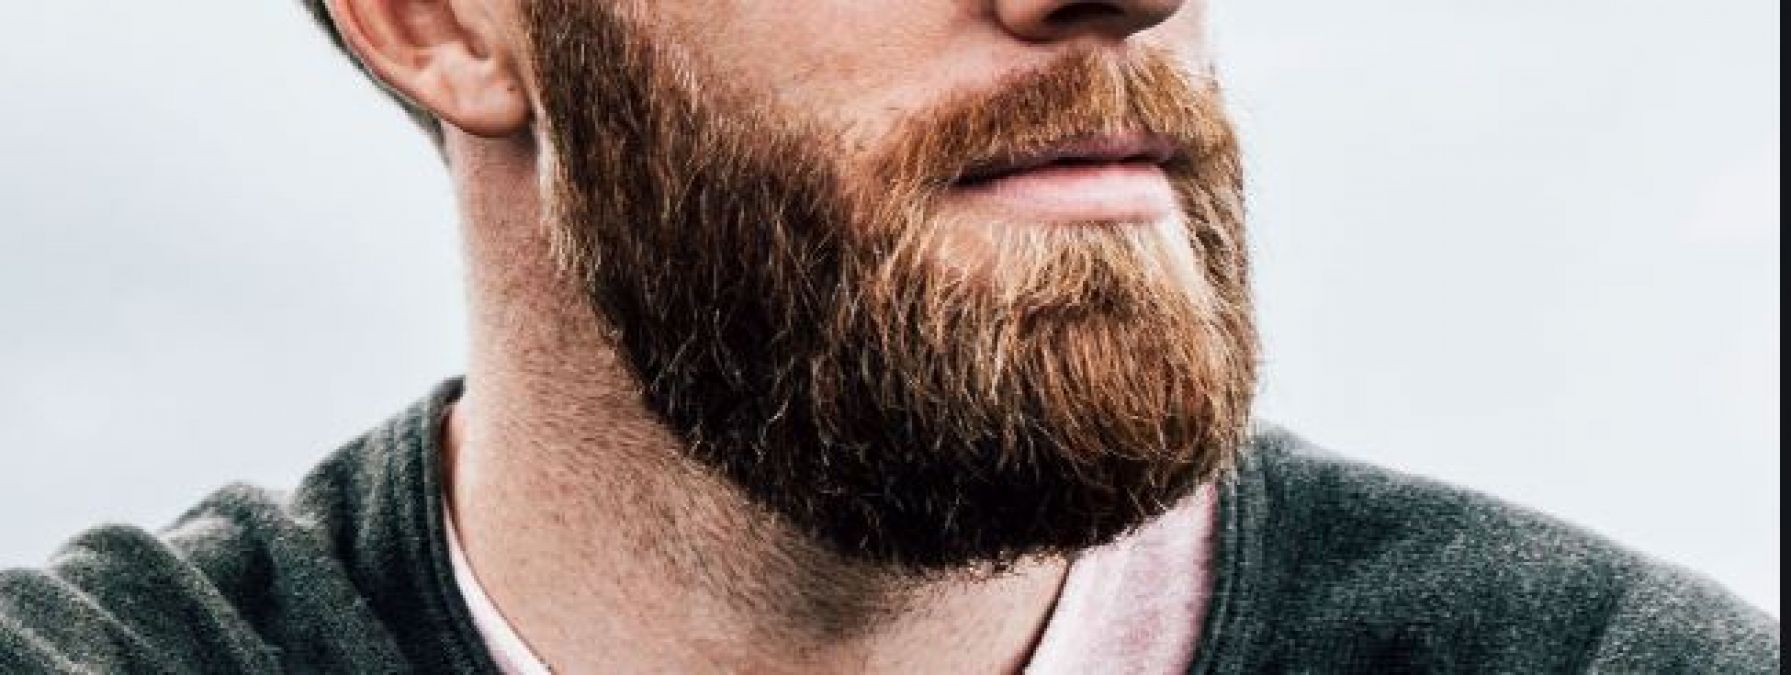 Tips and Tricks to grow beard faster with homemade products